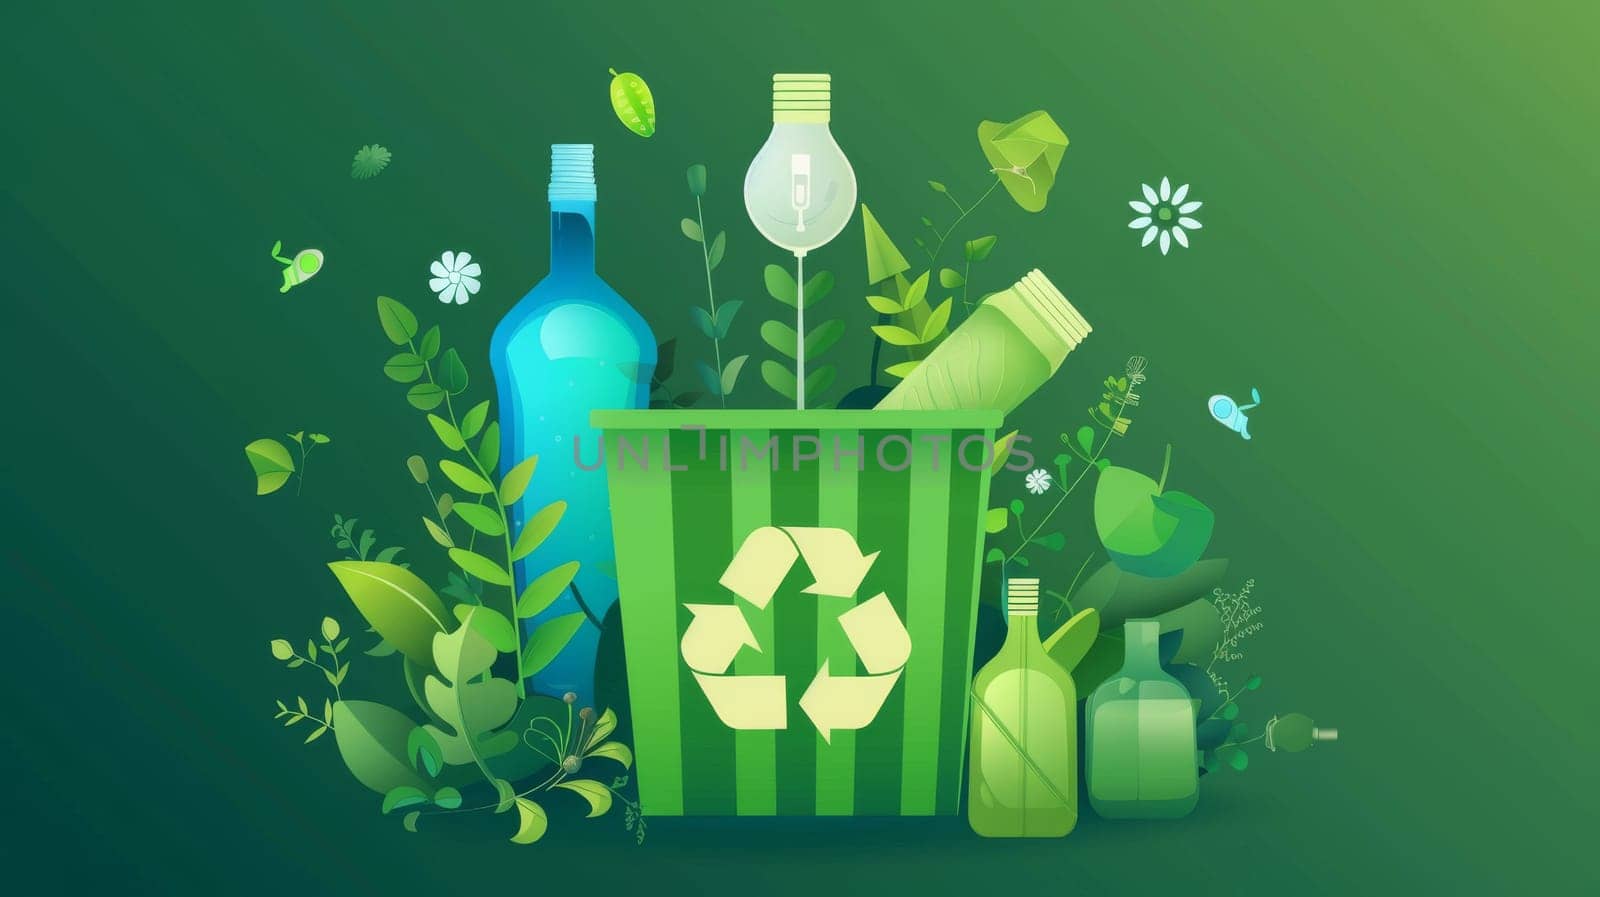 Concept background modern design for world environment day. Save the earth, recycle bin, lamp, bottle groovy style. Eco-friendly illustration design for social media, banner, campaign and web.